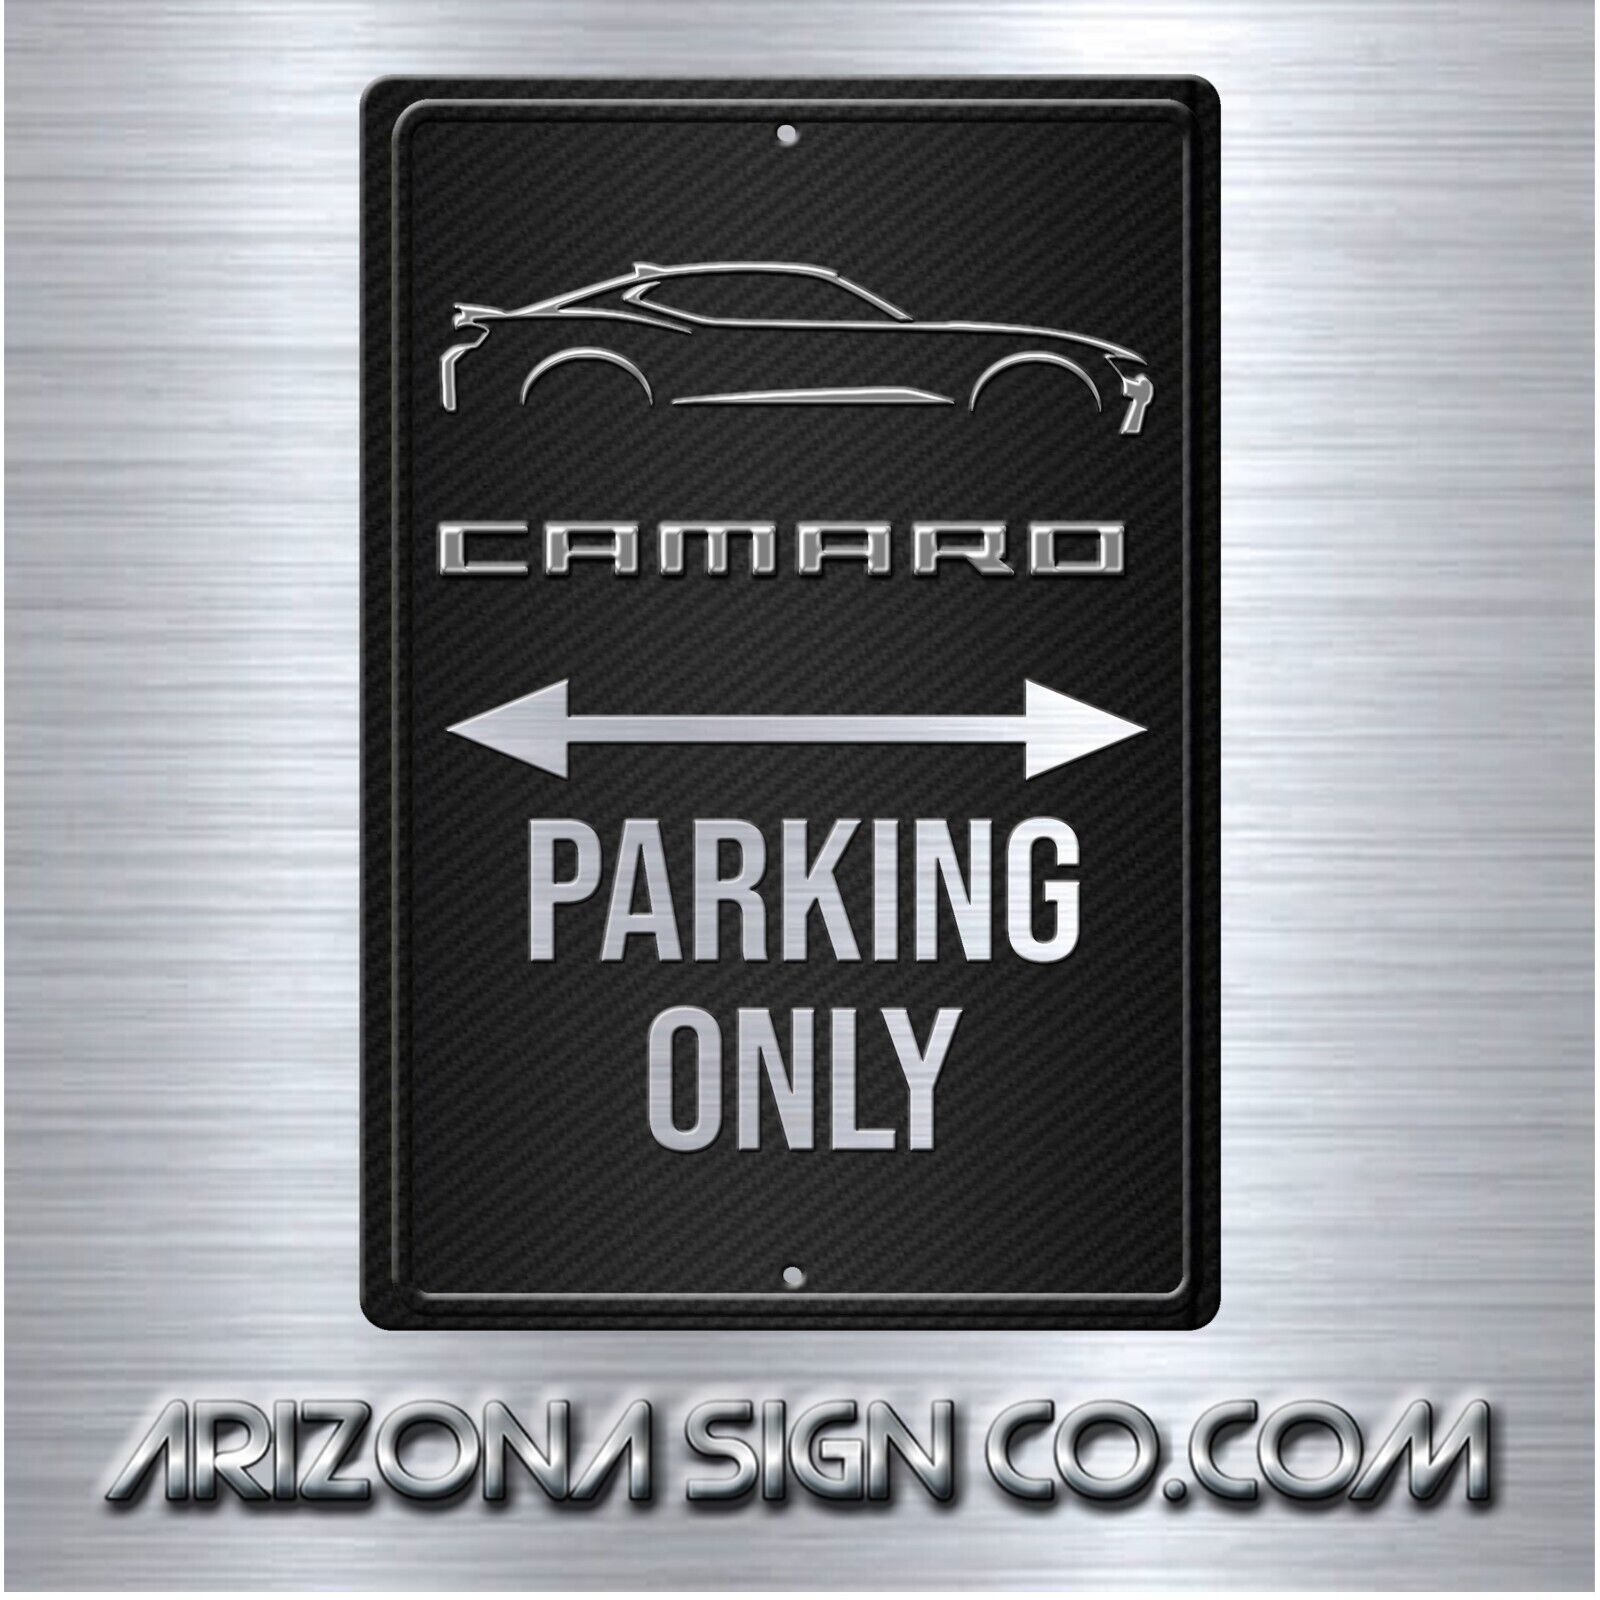 CAMARO Parking Only Aluminum Sign Simulated Faux Carbon Fiber 8